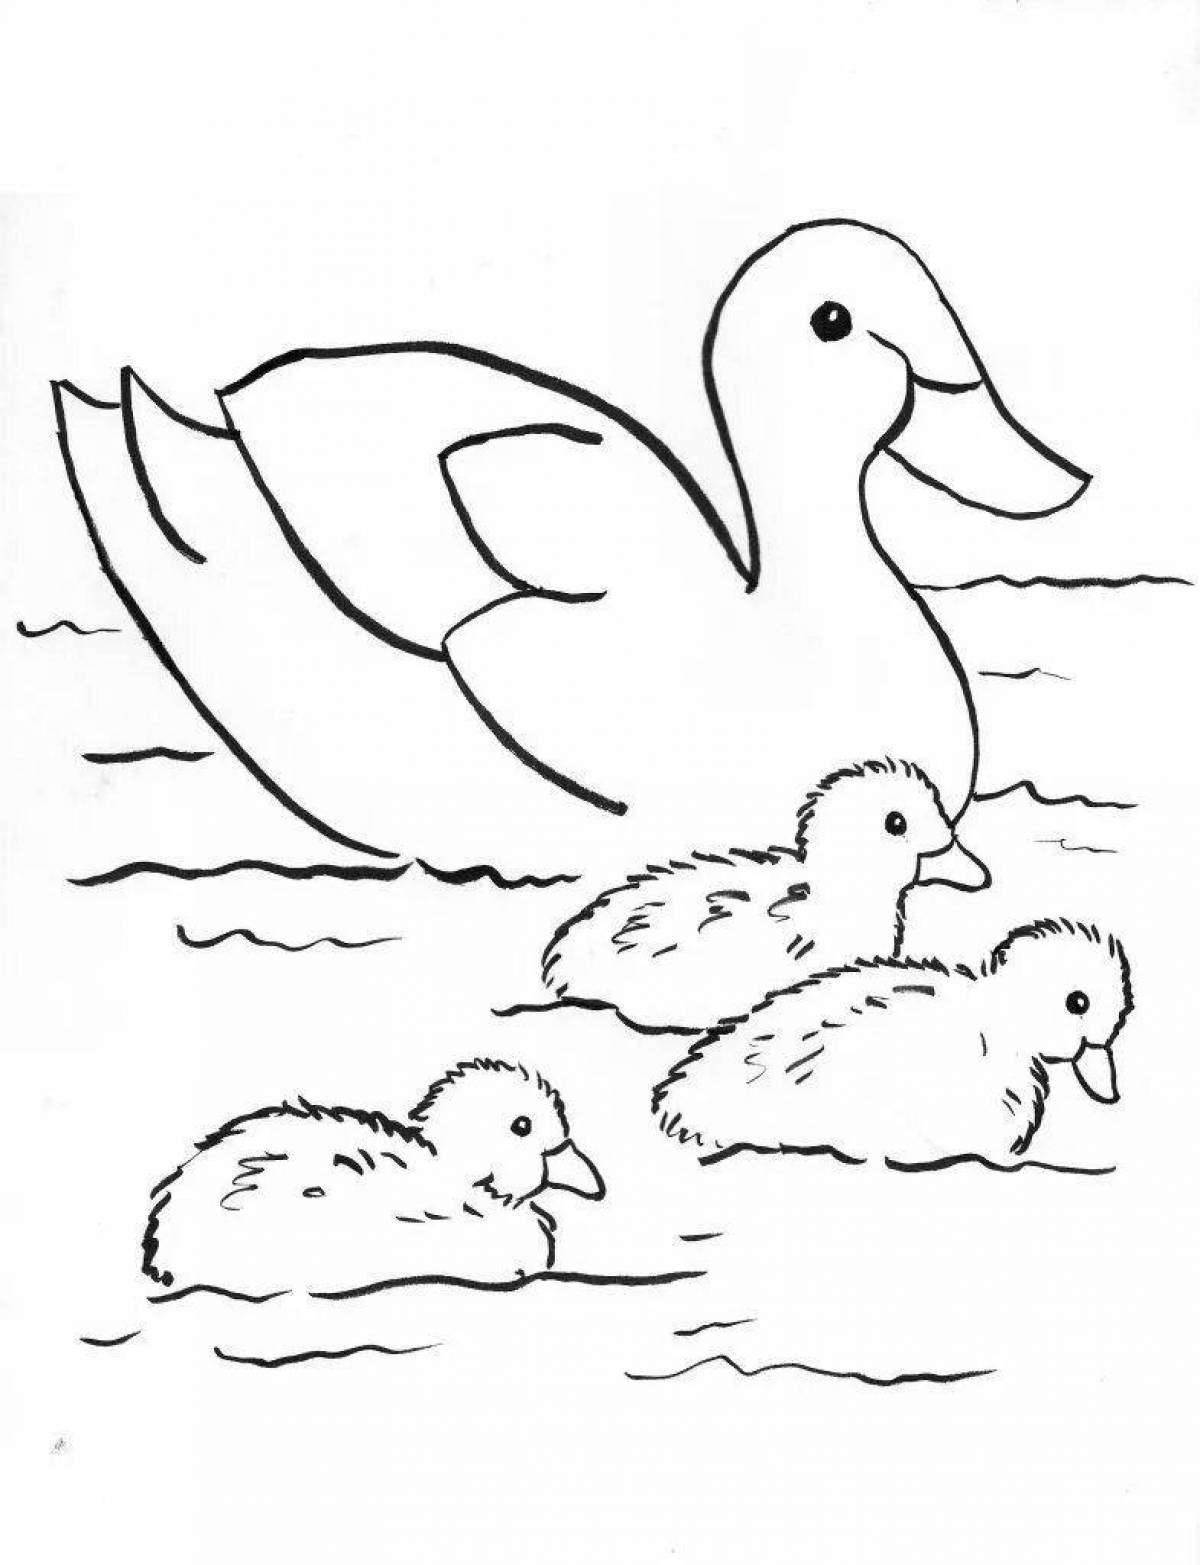 Coloring book shining duck and duckling